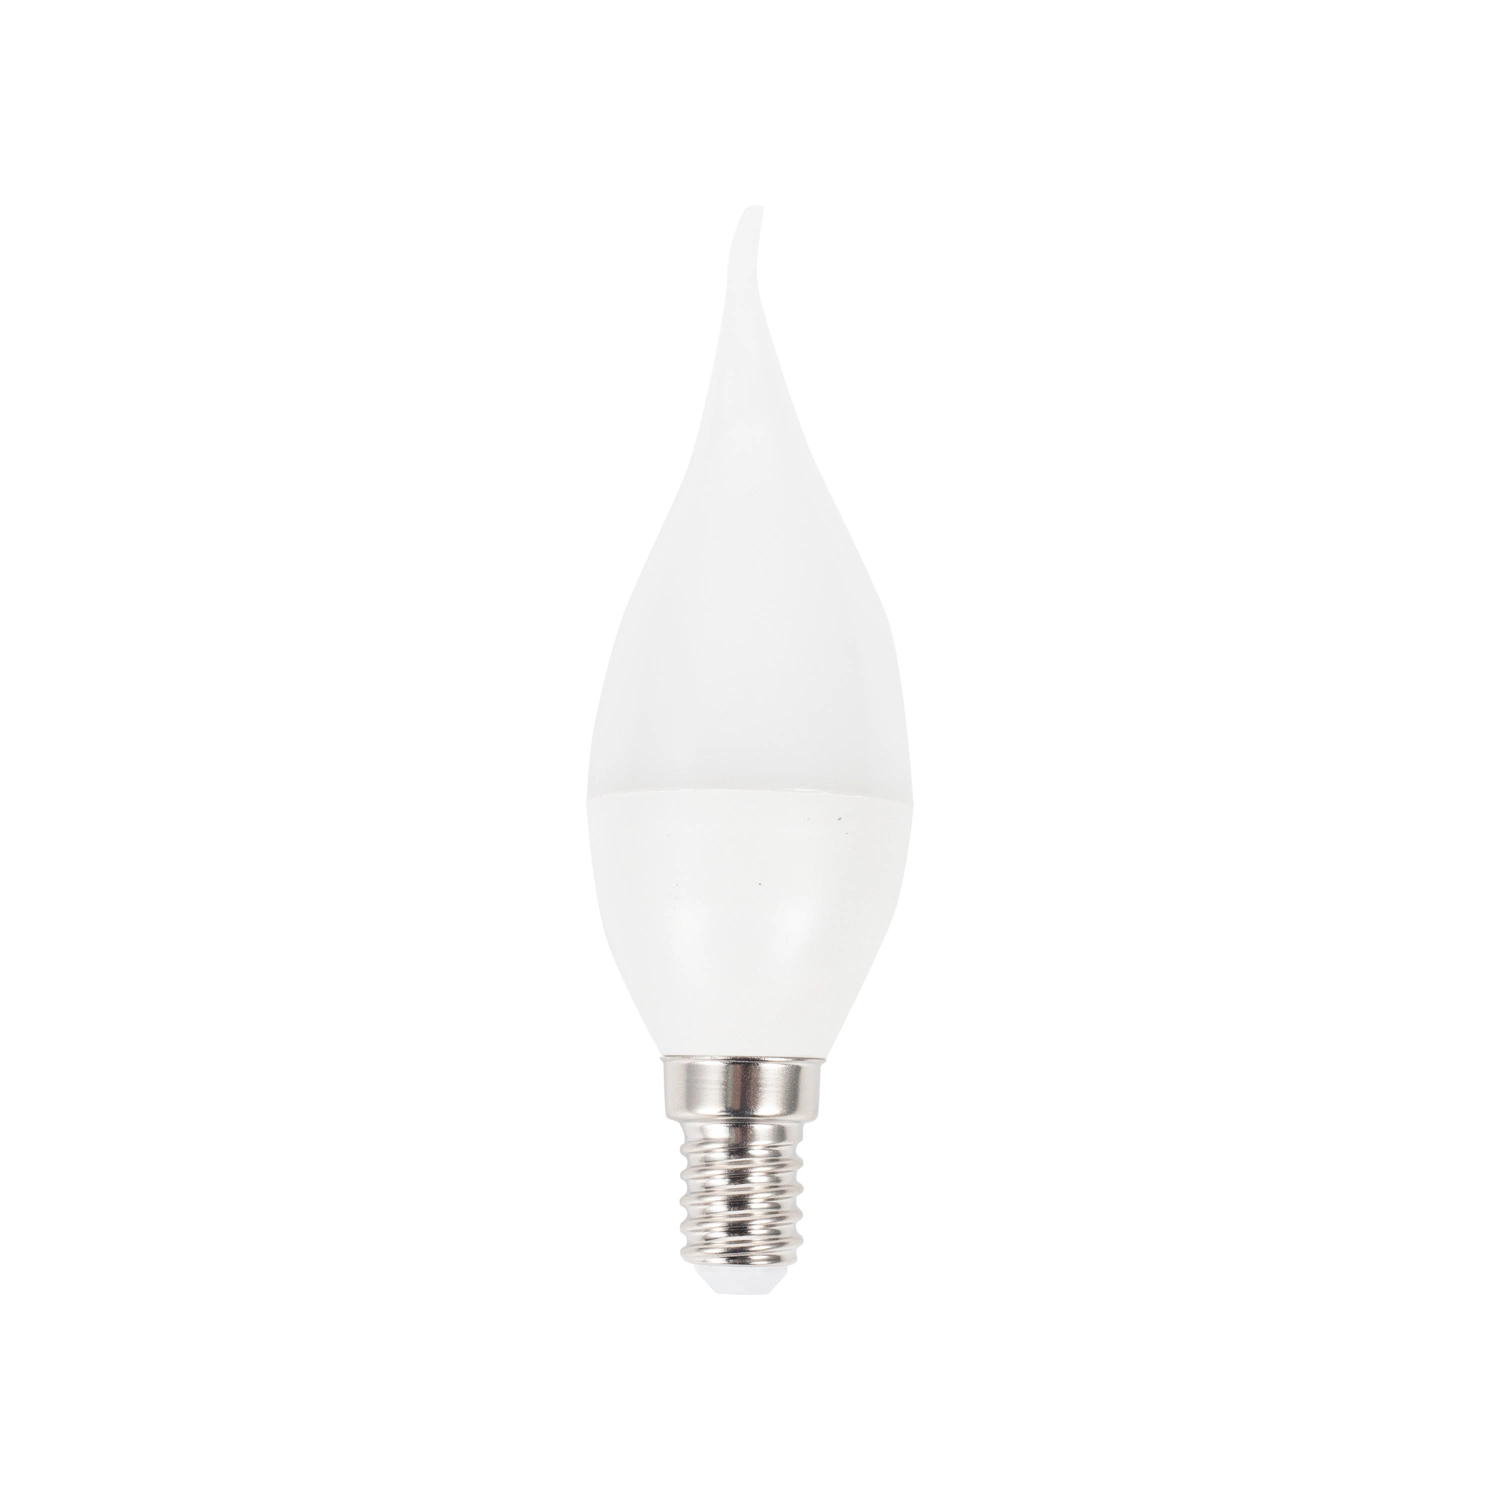 Ex Works Price LED Bulb Light Indoor Lighting Small LED Candle Bulb 6W Plastic LED Bulb Light E27 E14 B22 LED Lamp with CE RoHS ERP Approval for Home Decoration